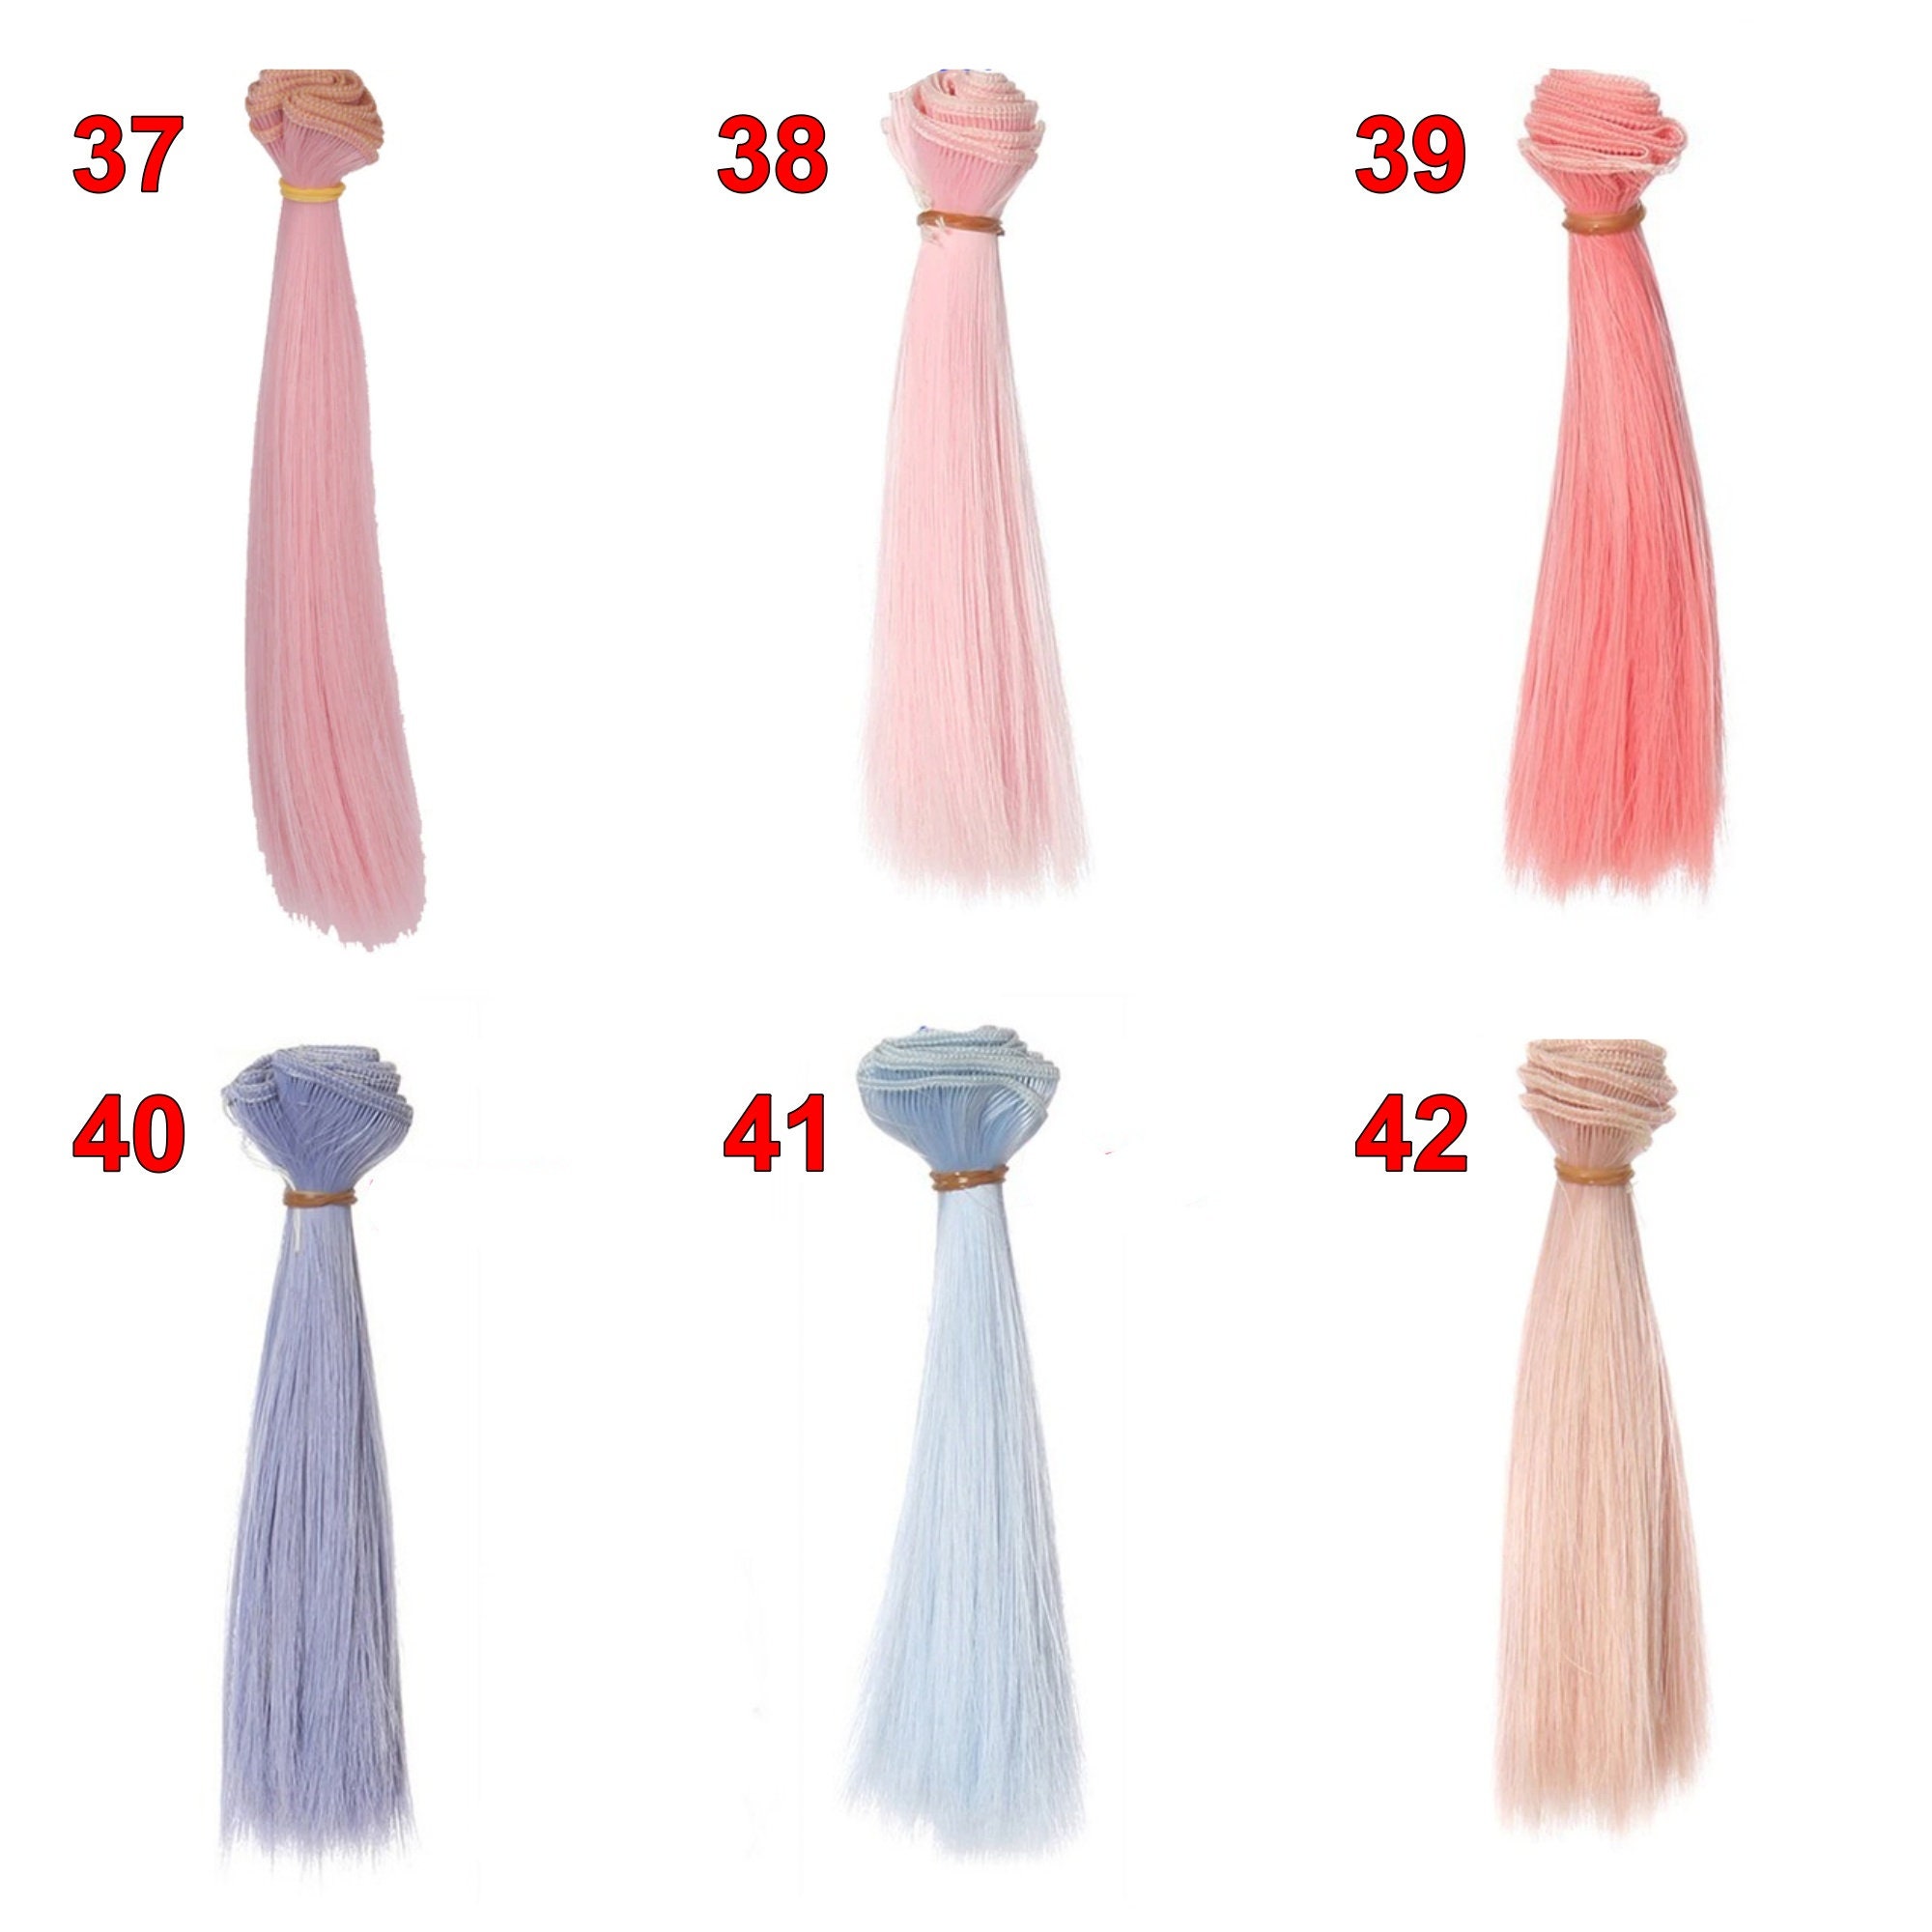 Ciieeo 5 Pcs Doll DIY Wig Straight Synthetic Doll Hair Wefts 15cm Imitation  Wool Roll Doll Hair Synthetic Hair Extensions for Rerooting Wig Making